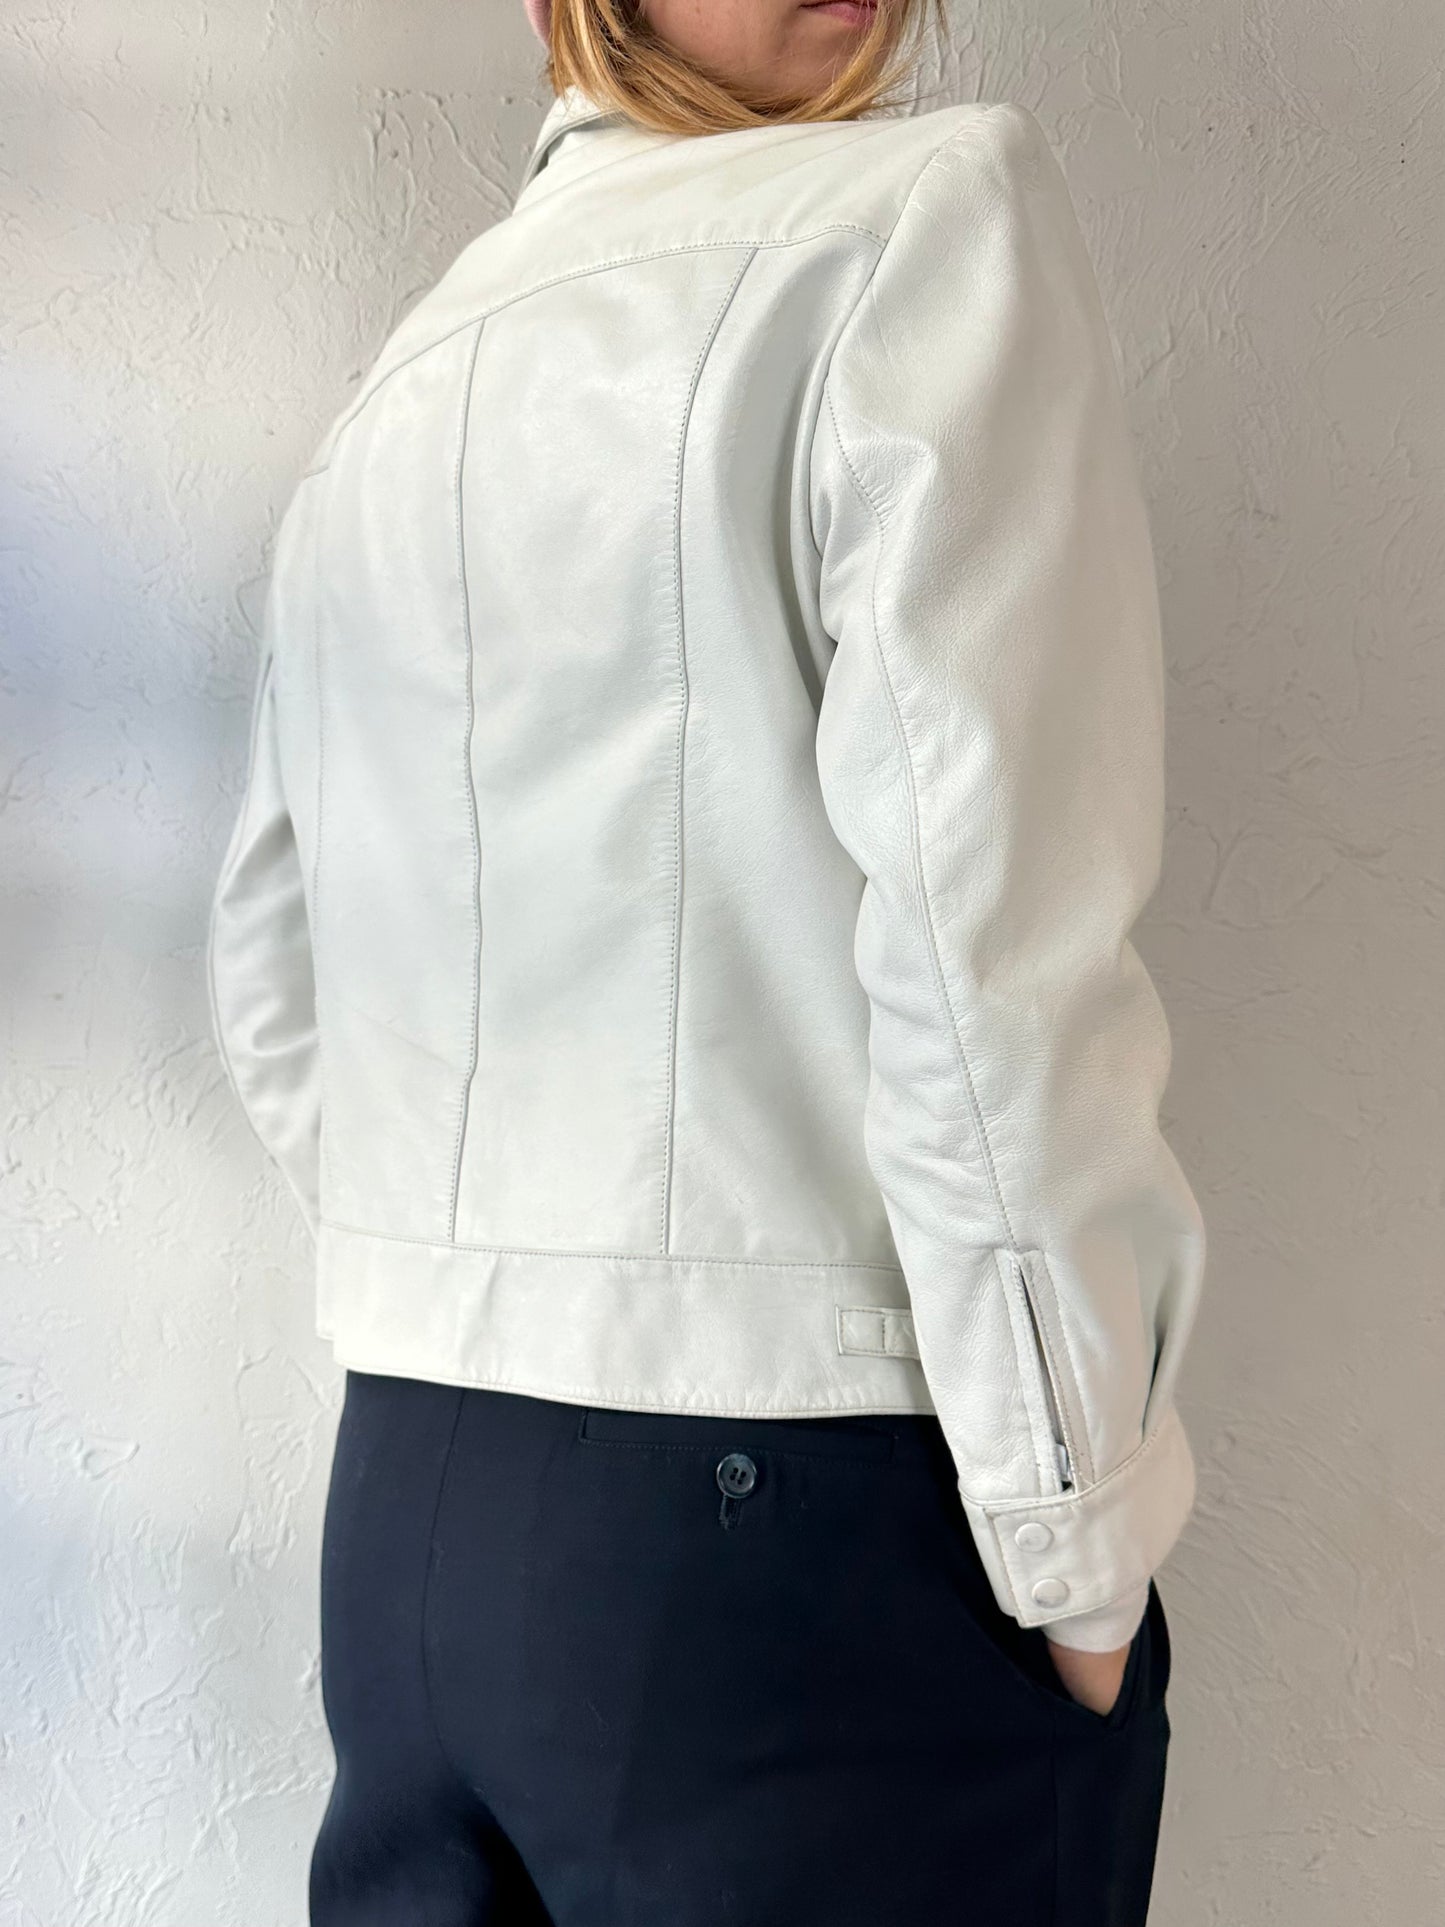 90s 'Winlit' White Leather Jacket / Small